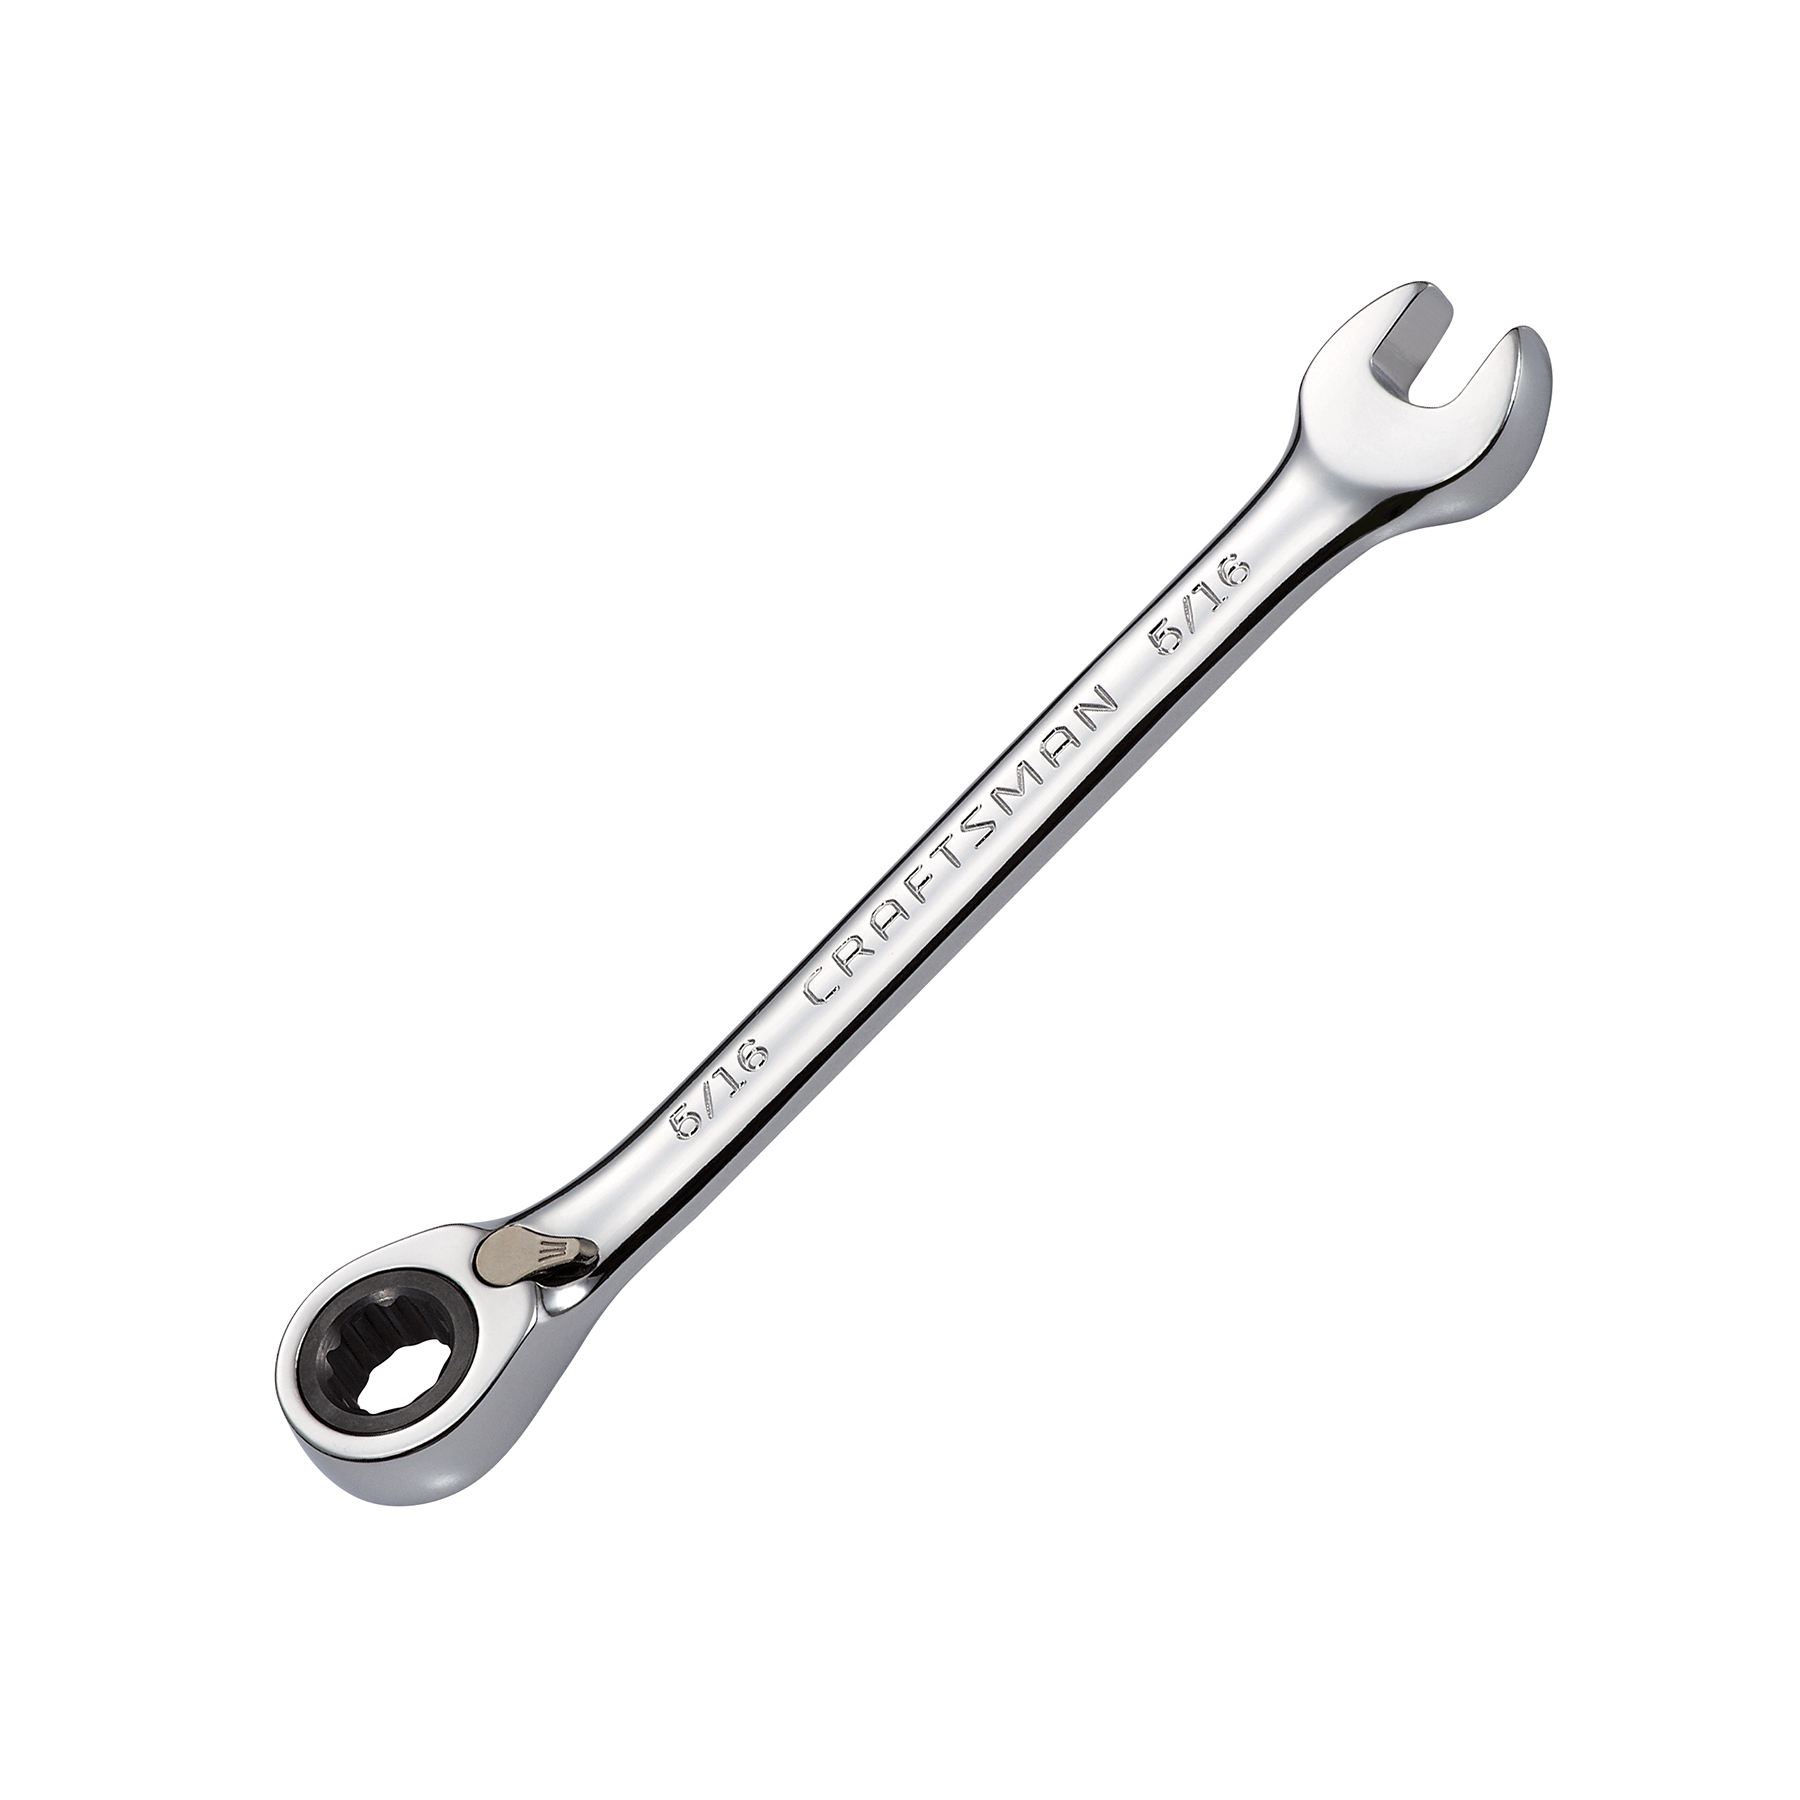 Craftsman 5/16" Reversible Ratcheting Combination Wrench